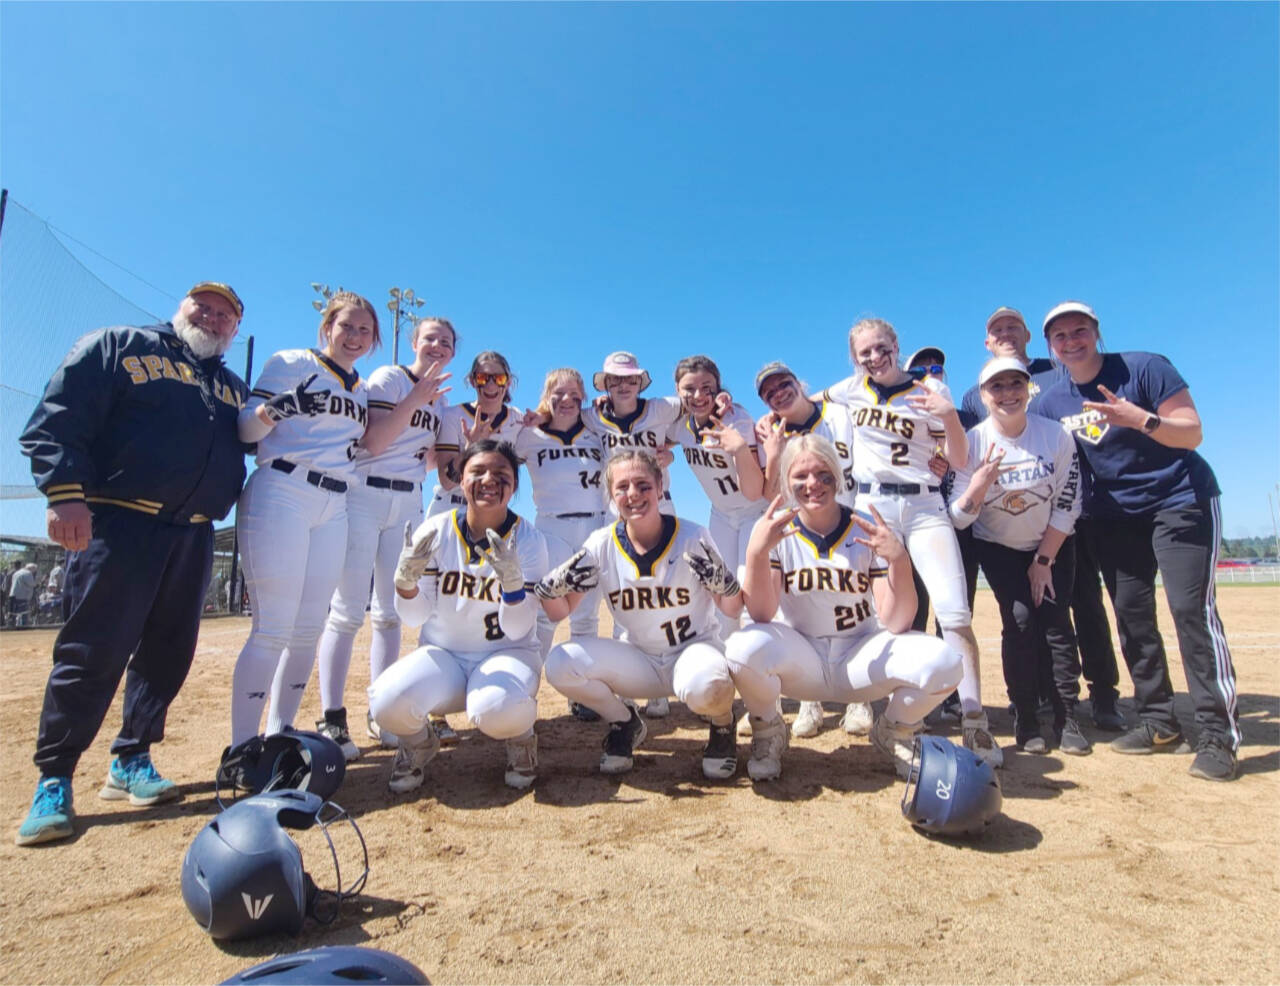 The Forks softball team celebrates representing the west side of the state and qualifying for the state 2B tournament at the Southwest 1/4 tournament this weekend. (Courtesy photo)